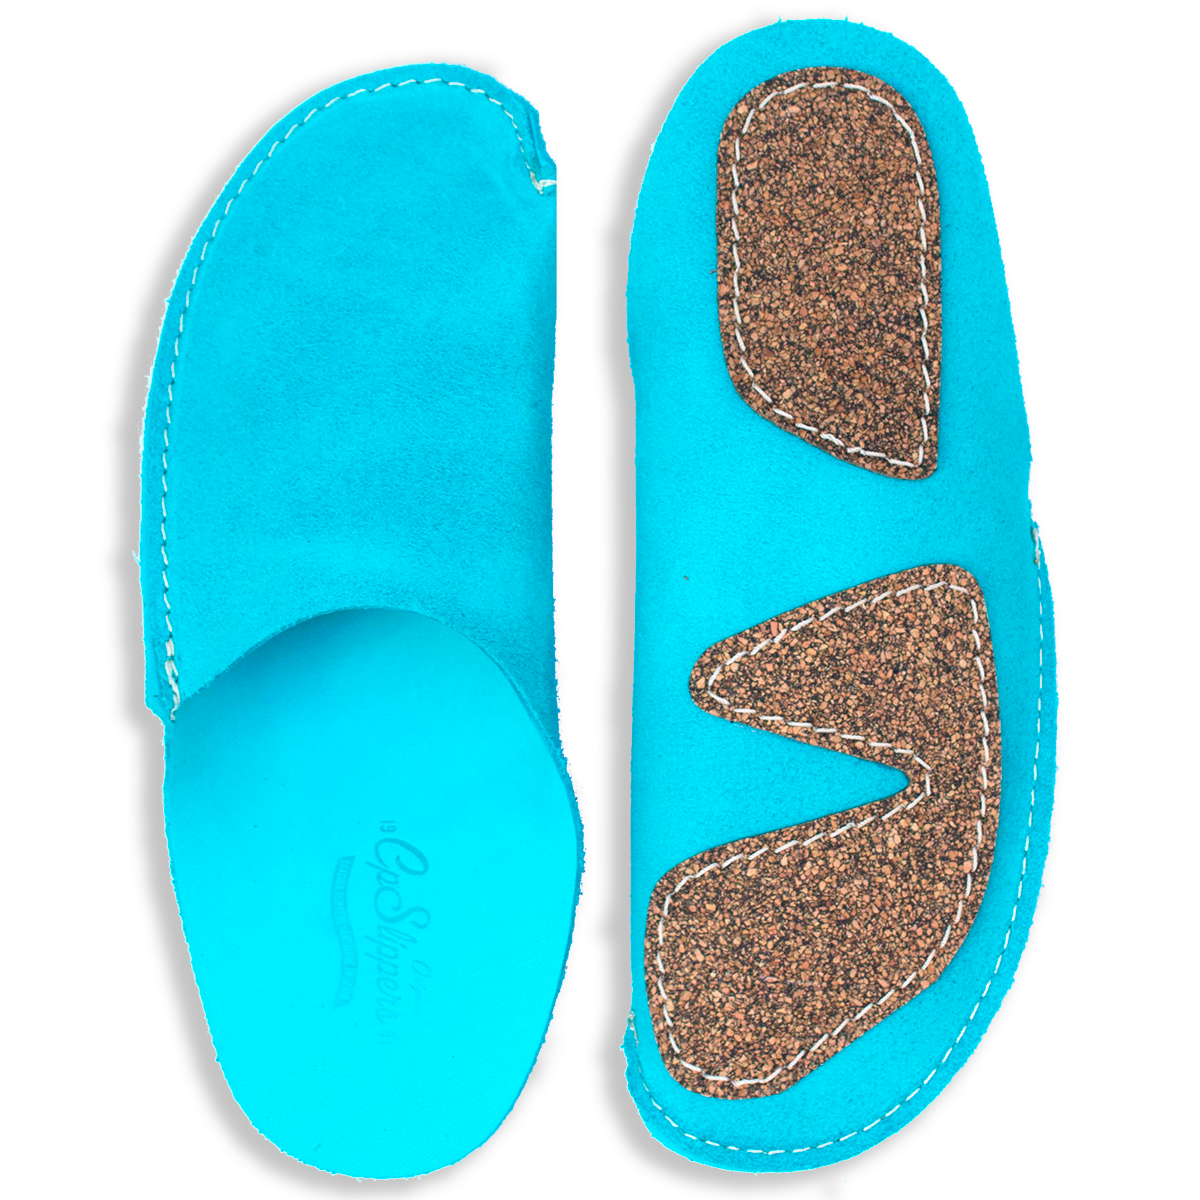 Turquoise leather color CP Slippers home shoes with cork sole anti-slip